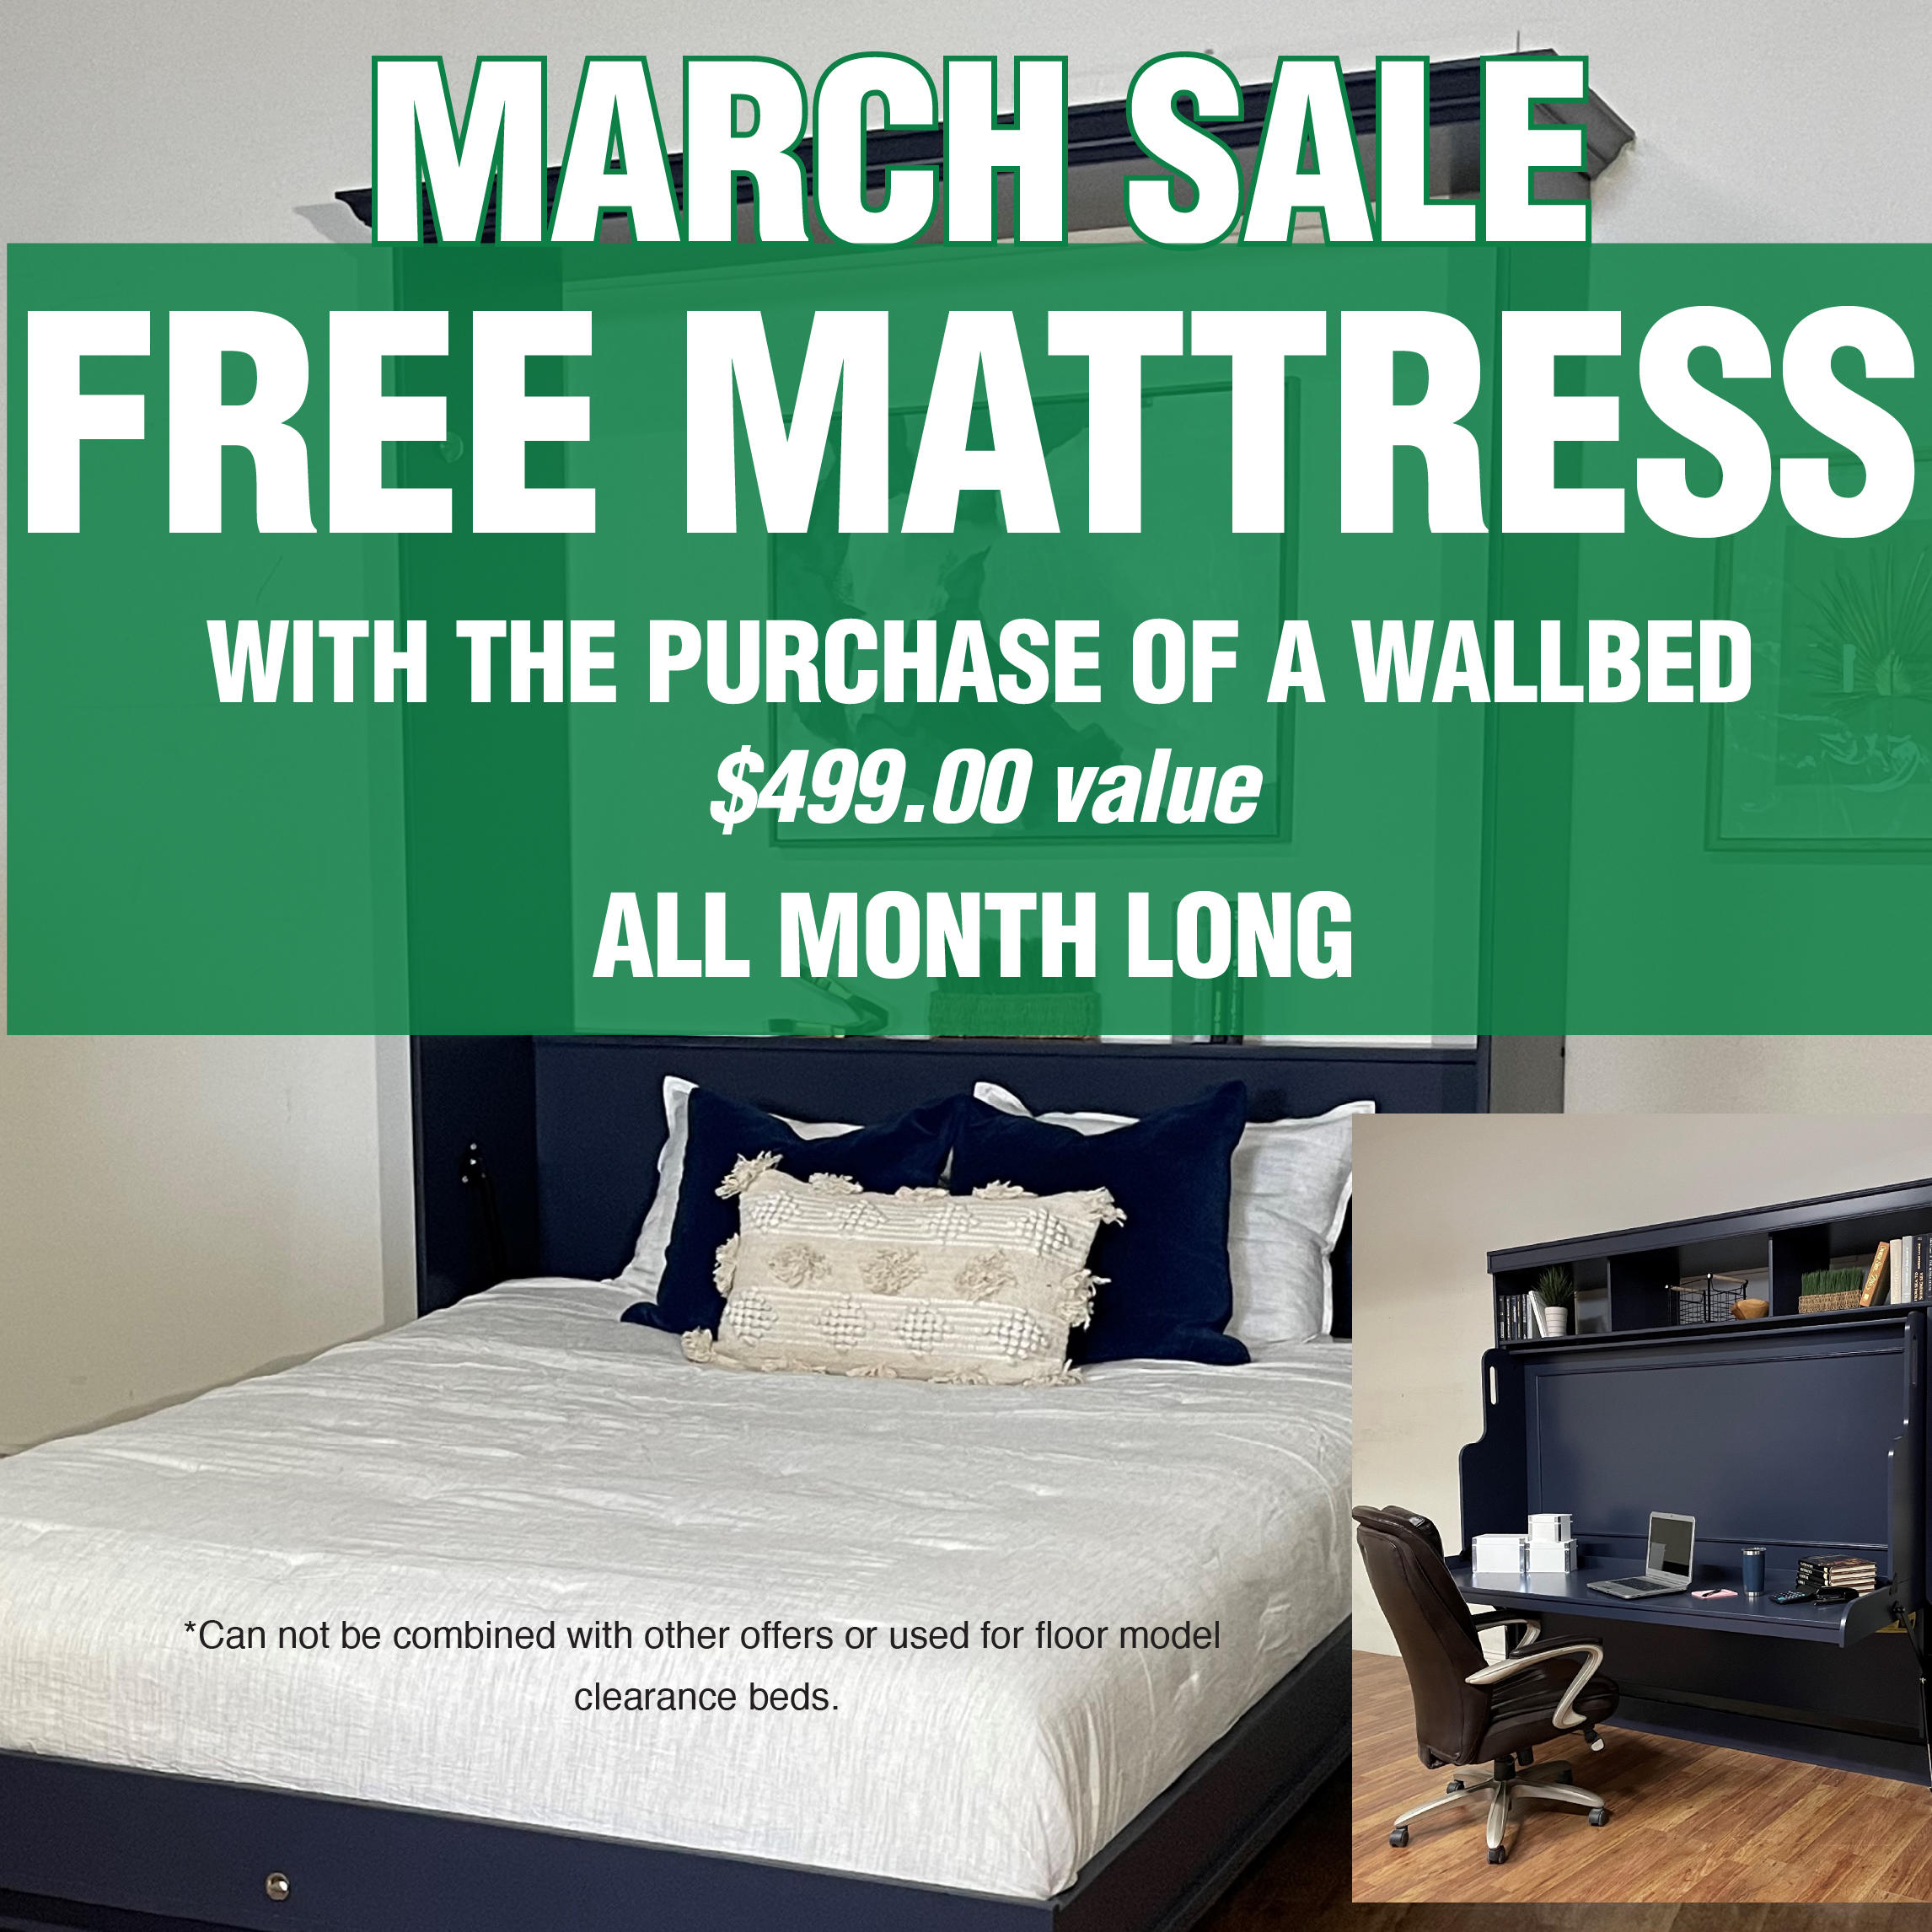 March Madness Sale! A $499.00 Value!
Get a Free Mattress with your purchase of a wall bed or Murphy Bed